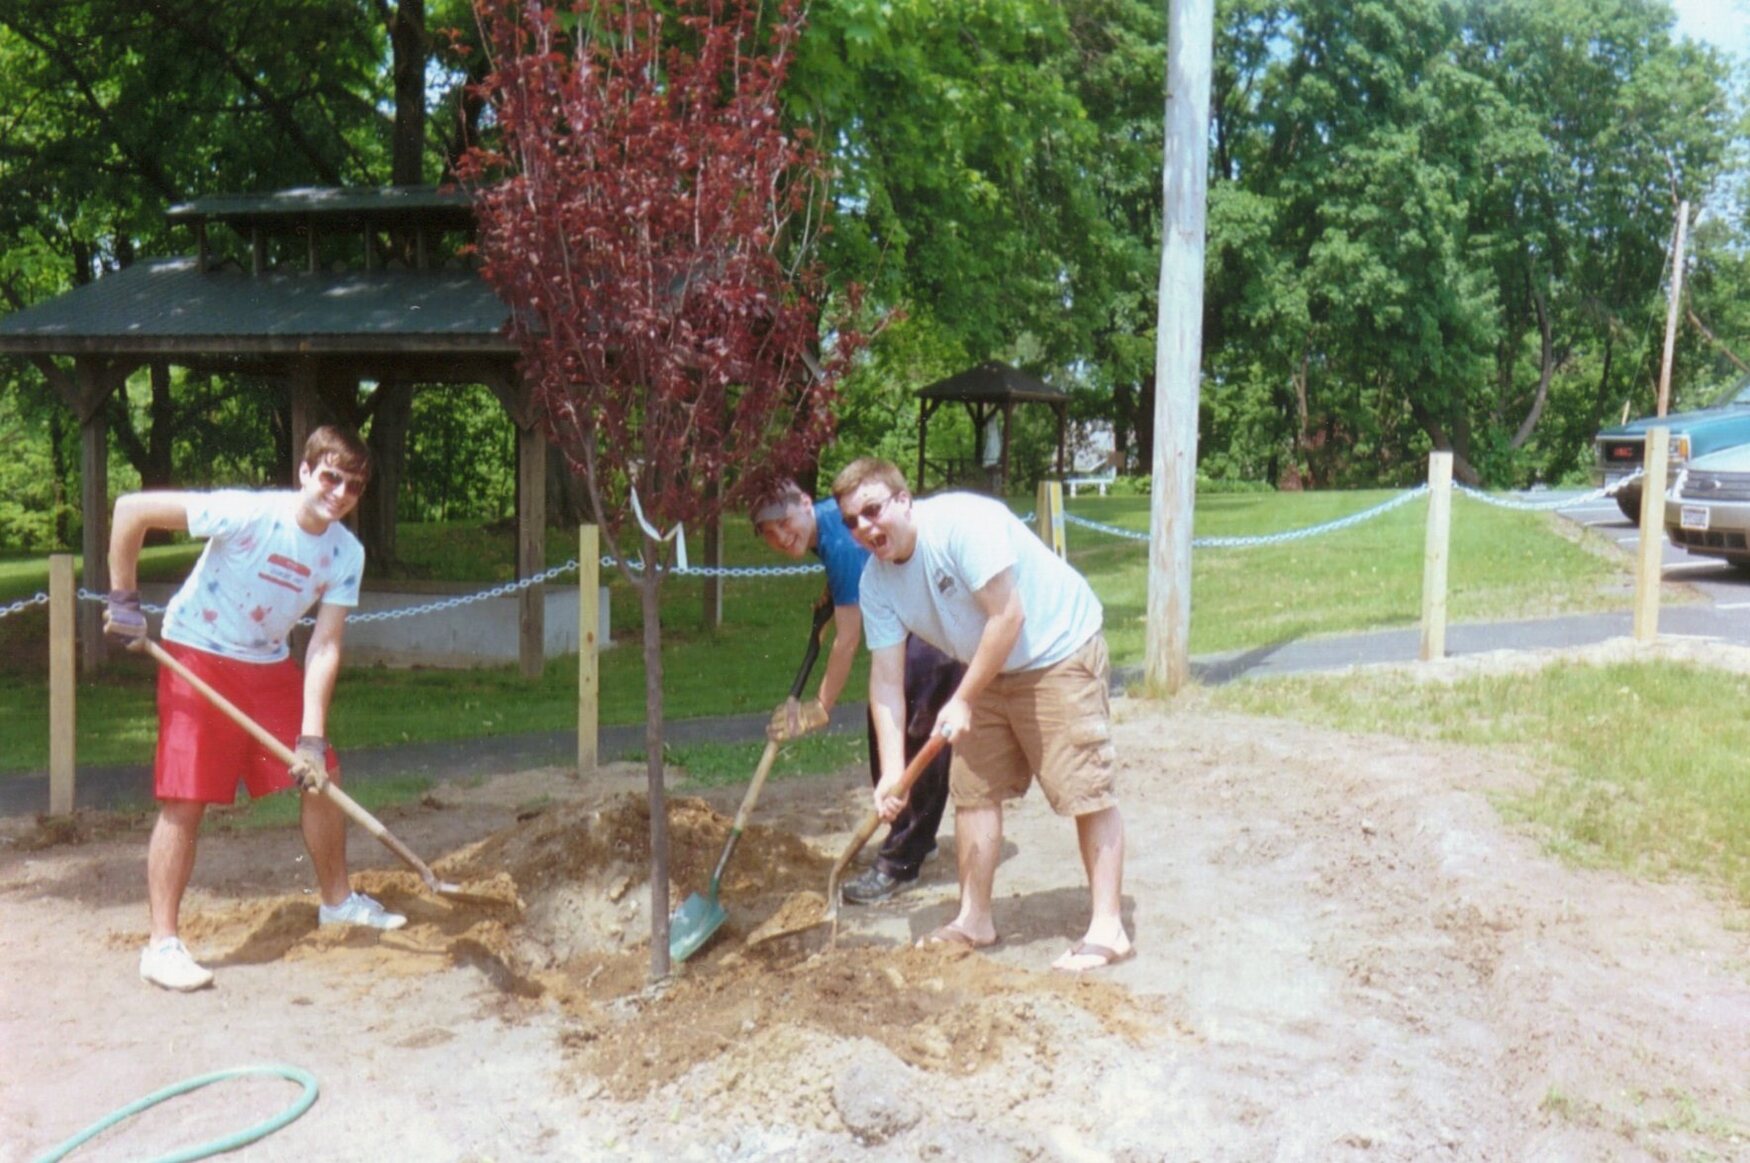 Seth, Brett, and Rob holding shovels filling in a whole that contains a red tree.  They are standing on dirt, and smiling.